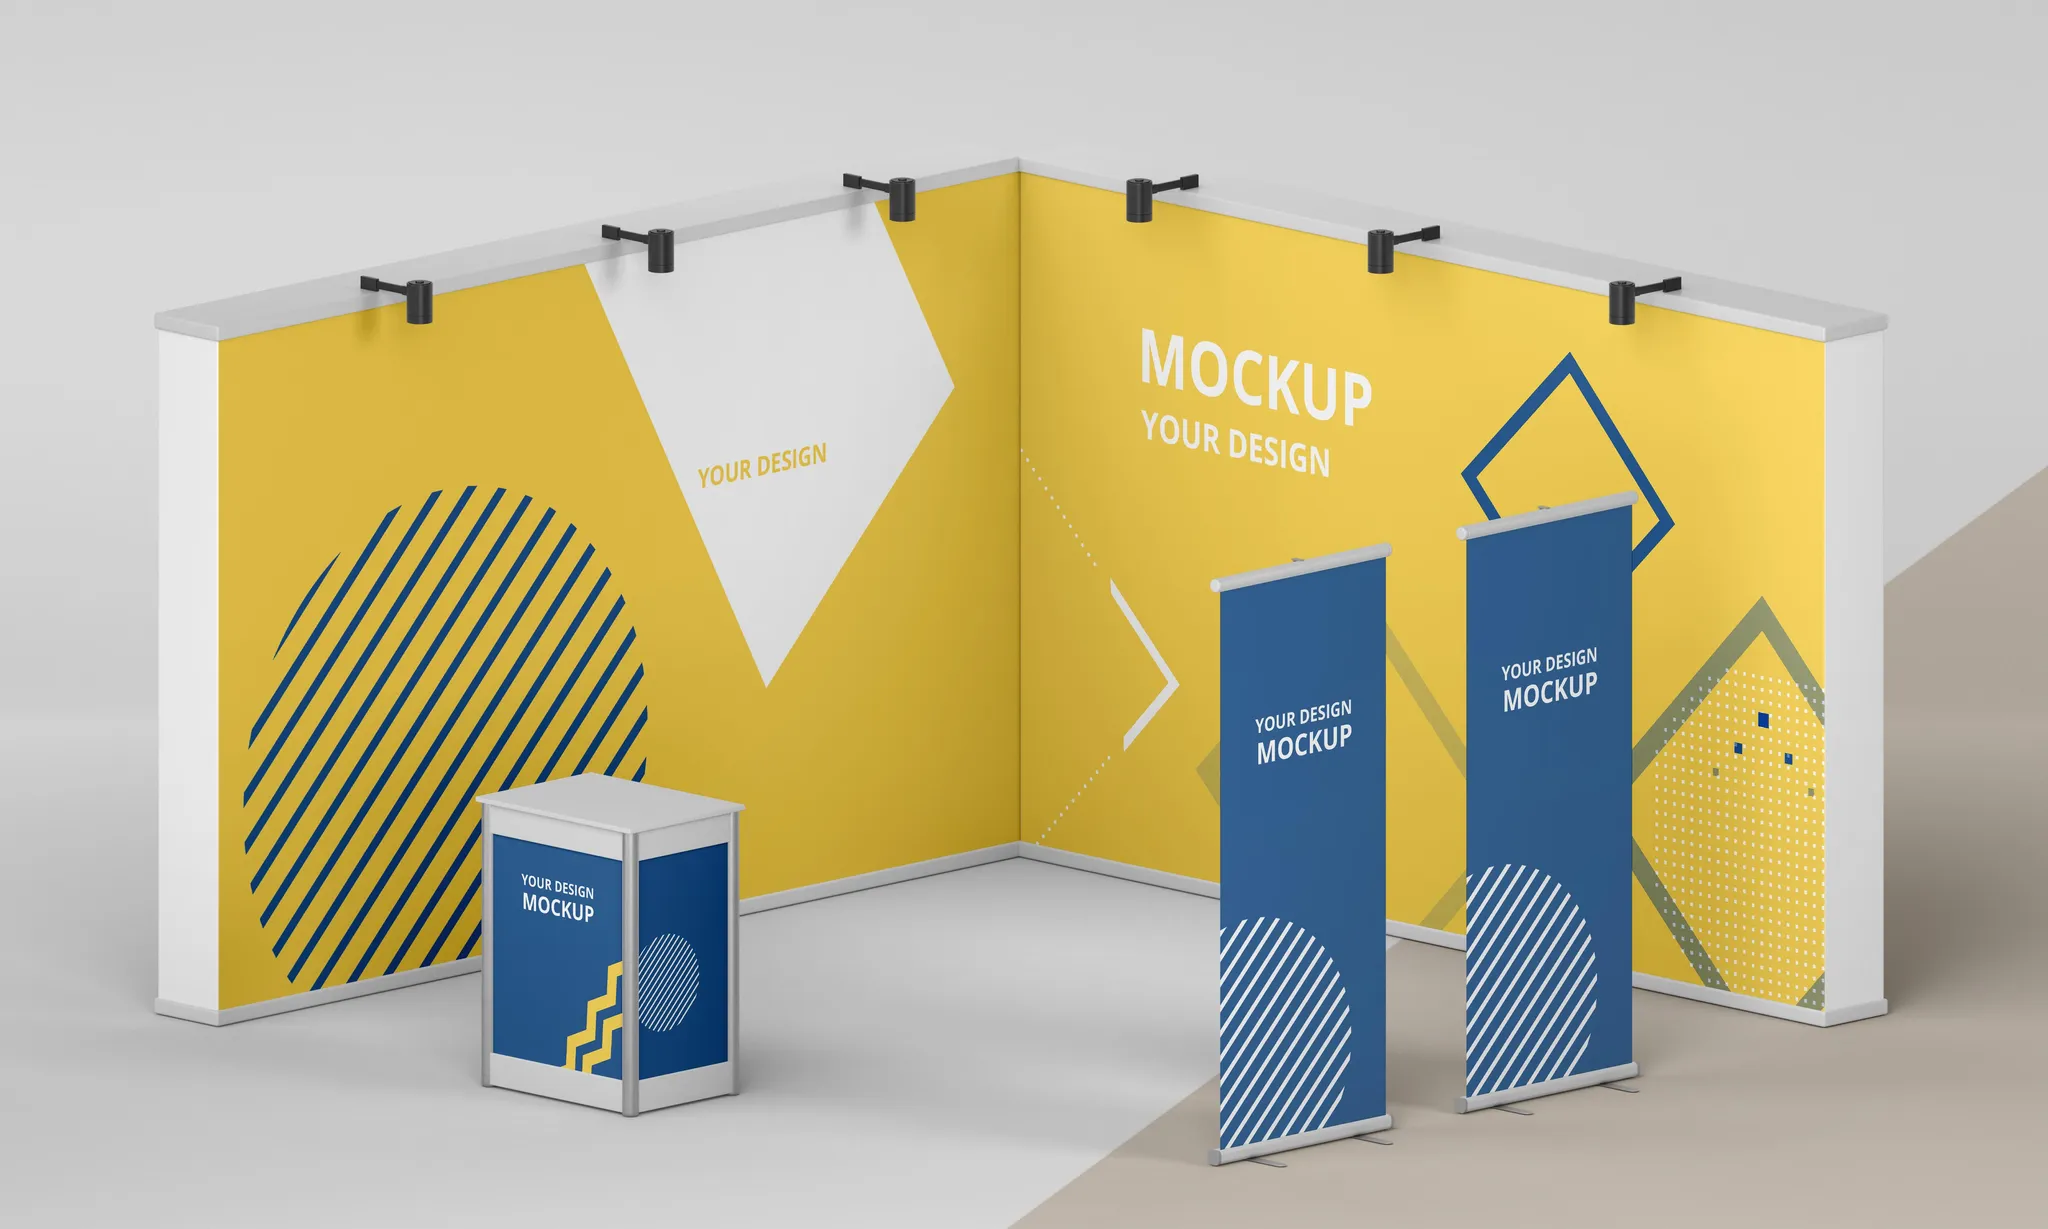 The Best 15 Trade Show Booth Design Companies